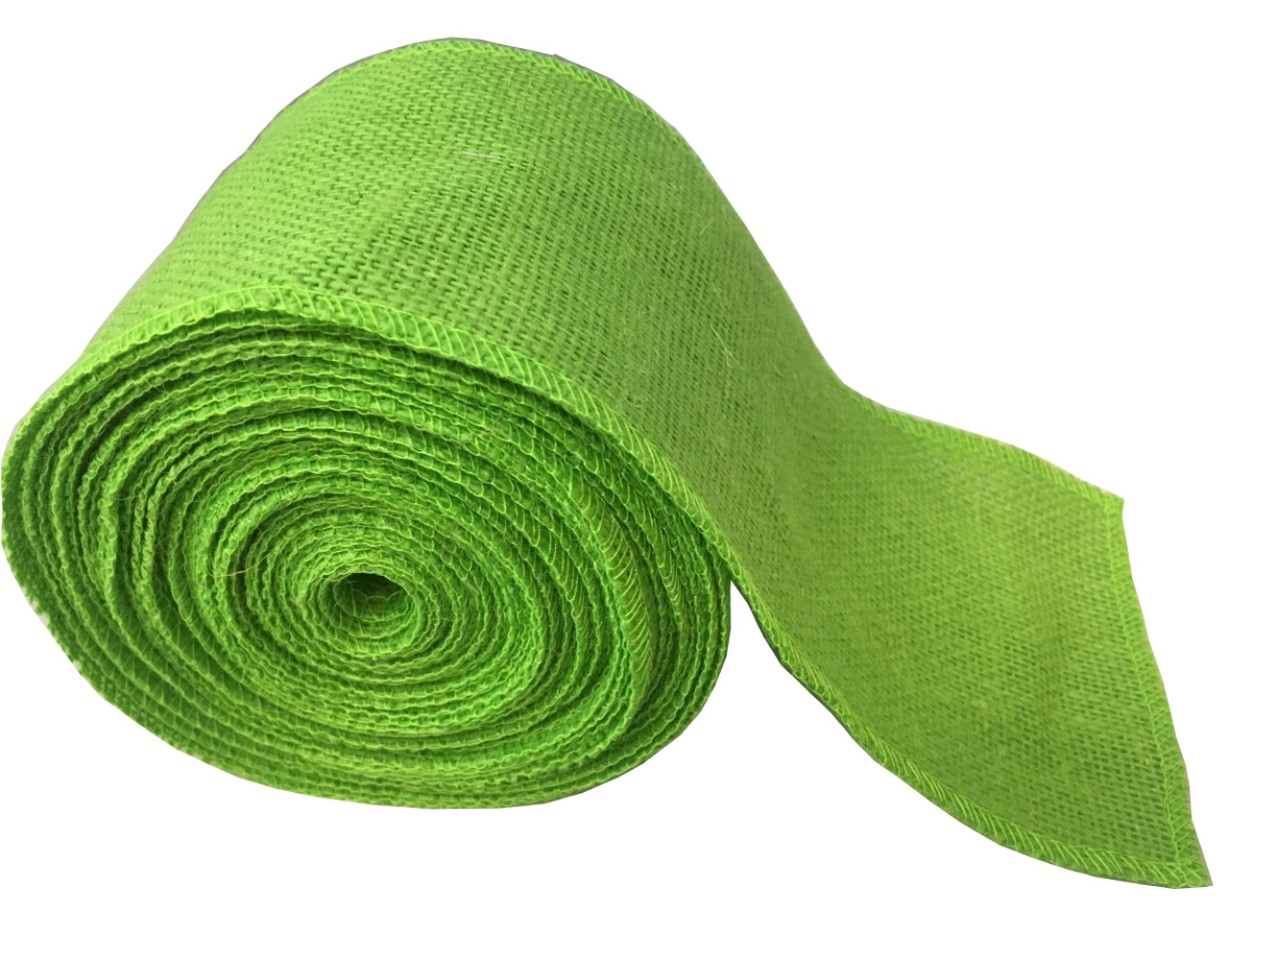 4" Lime Burlap Ribbon - 10 Yards (Sewn Edges) Made in USA